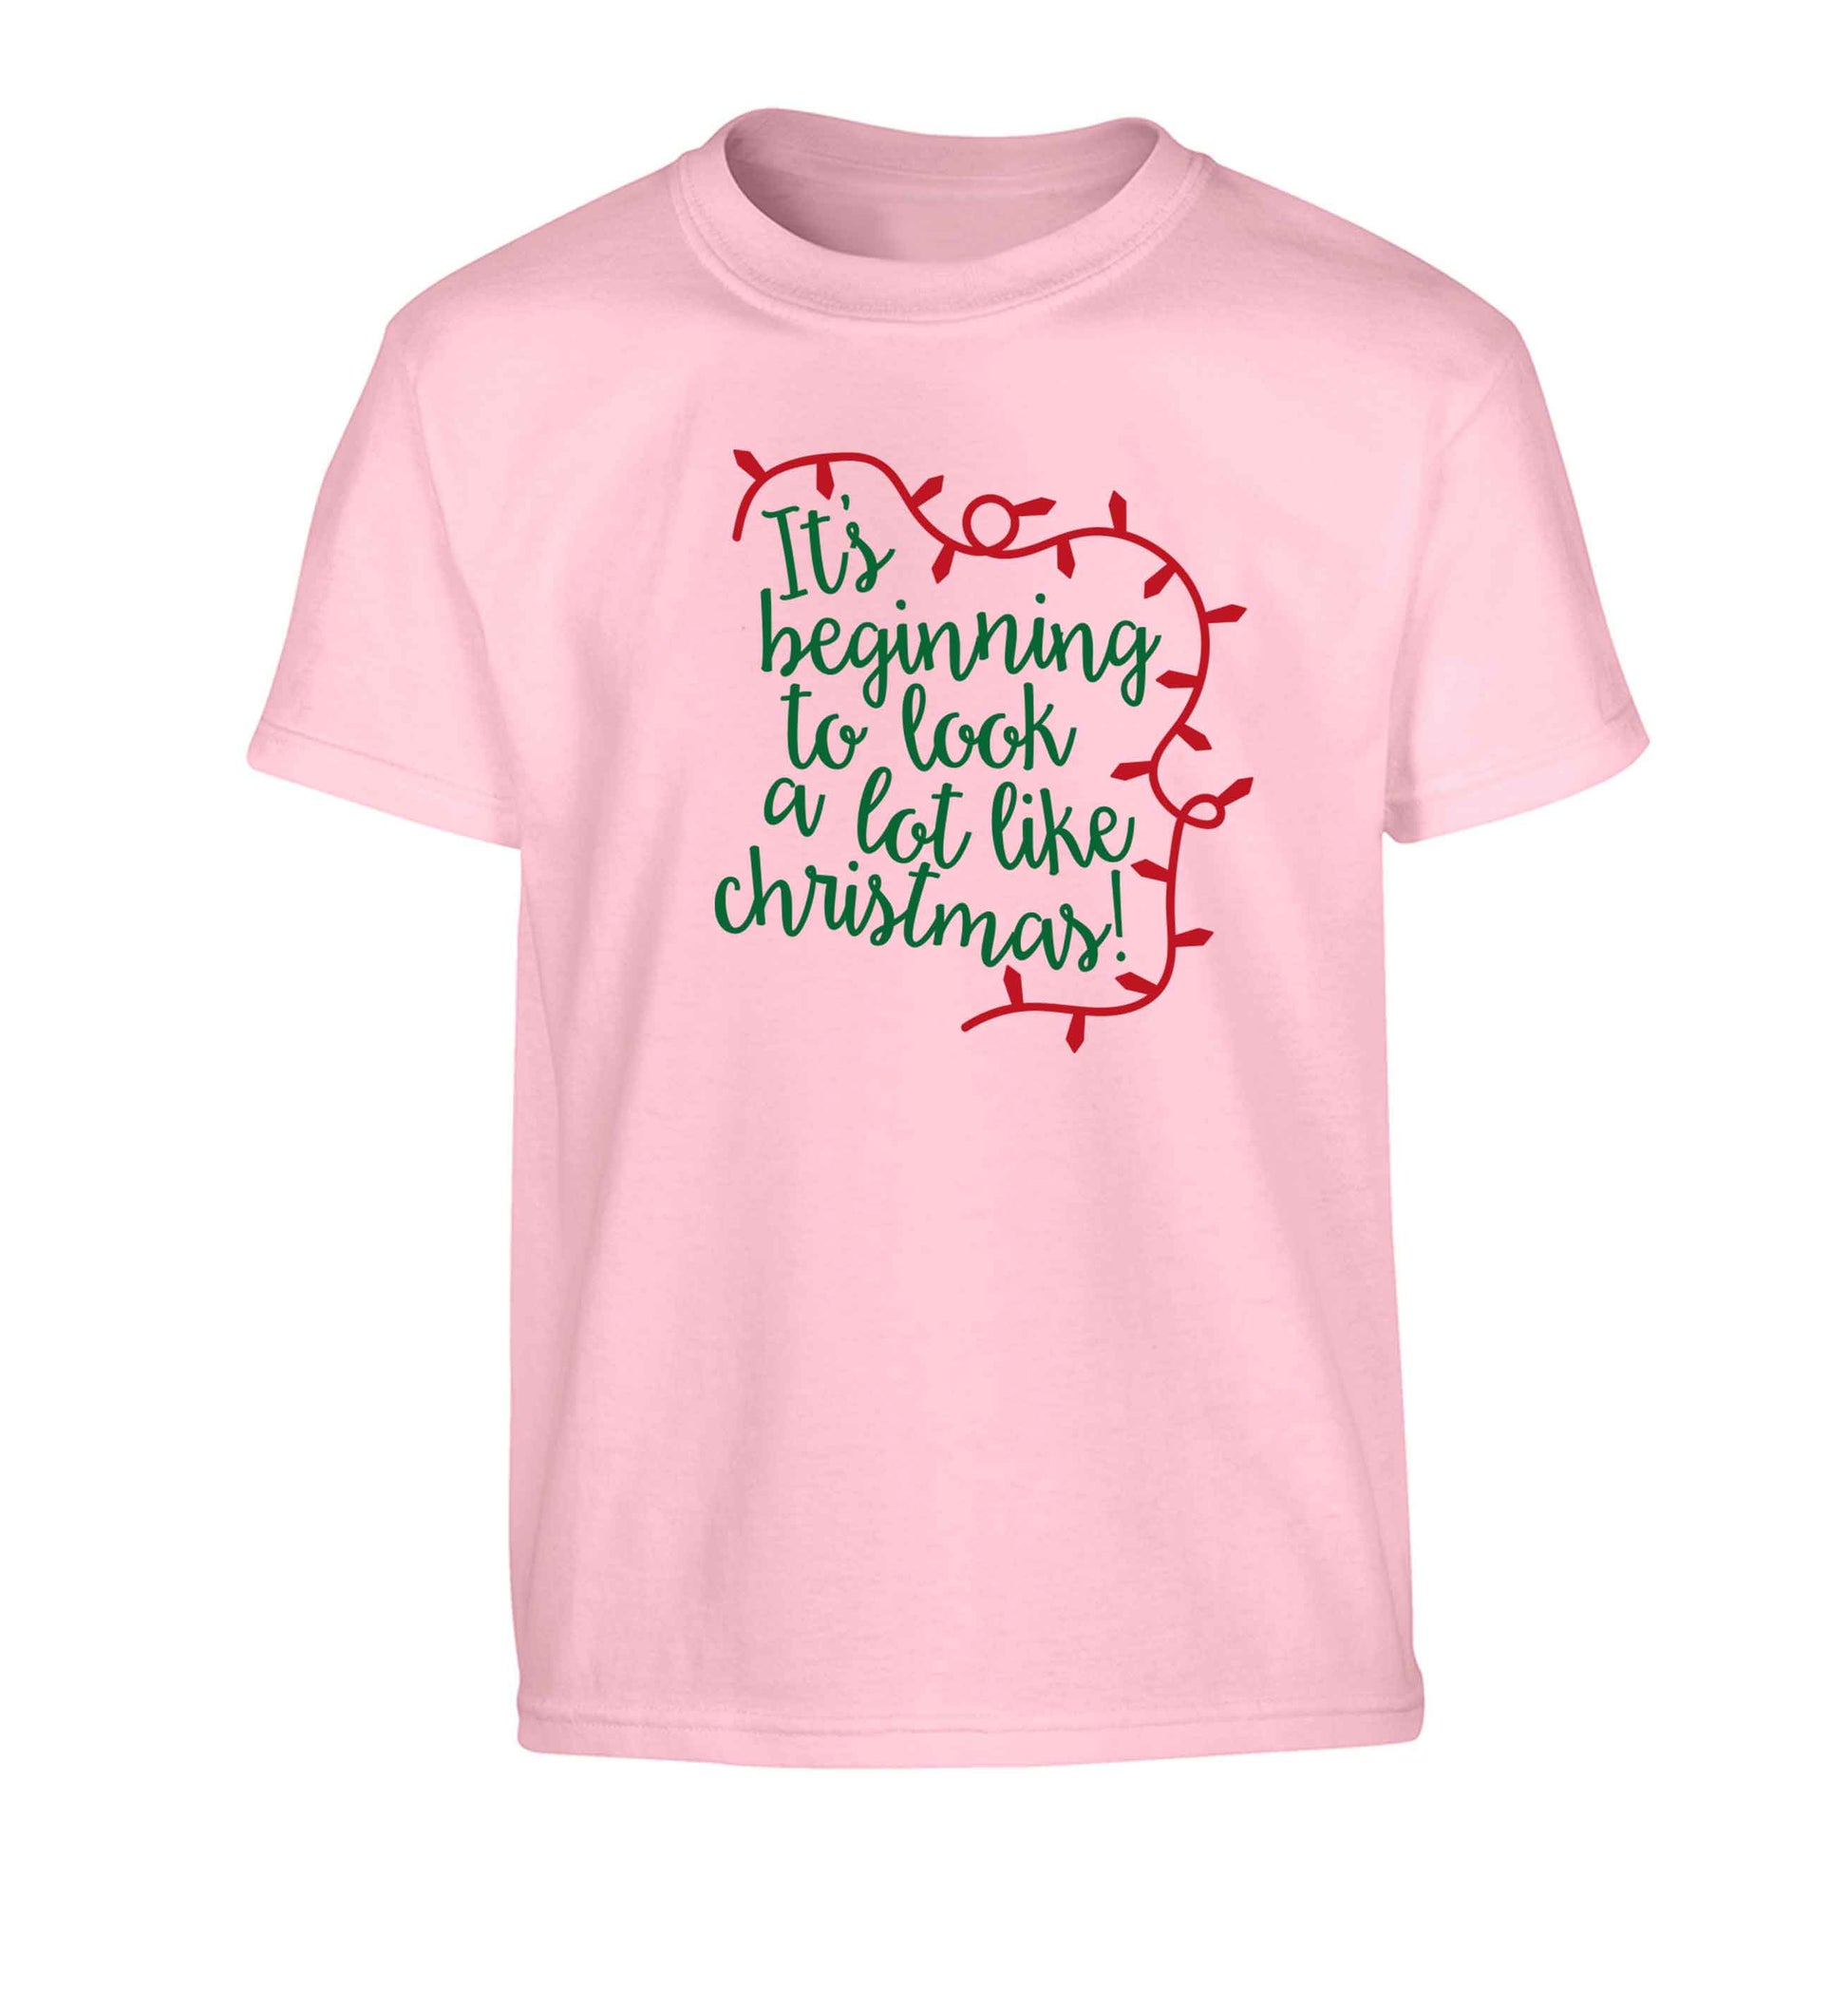 It's beginning to look a lot like Christmas Children's light pink Tshirt 12-13 Years